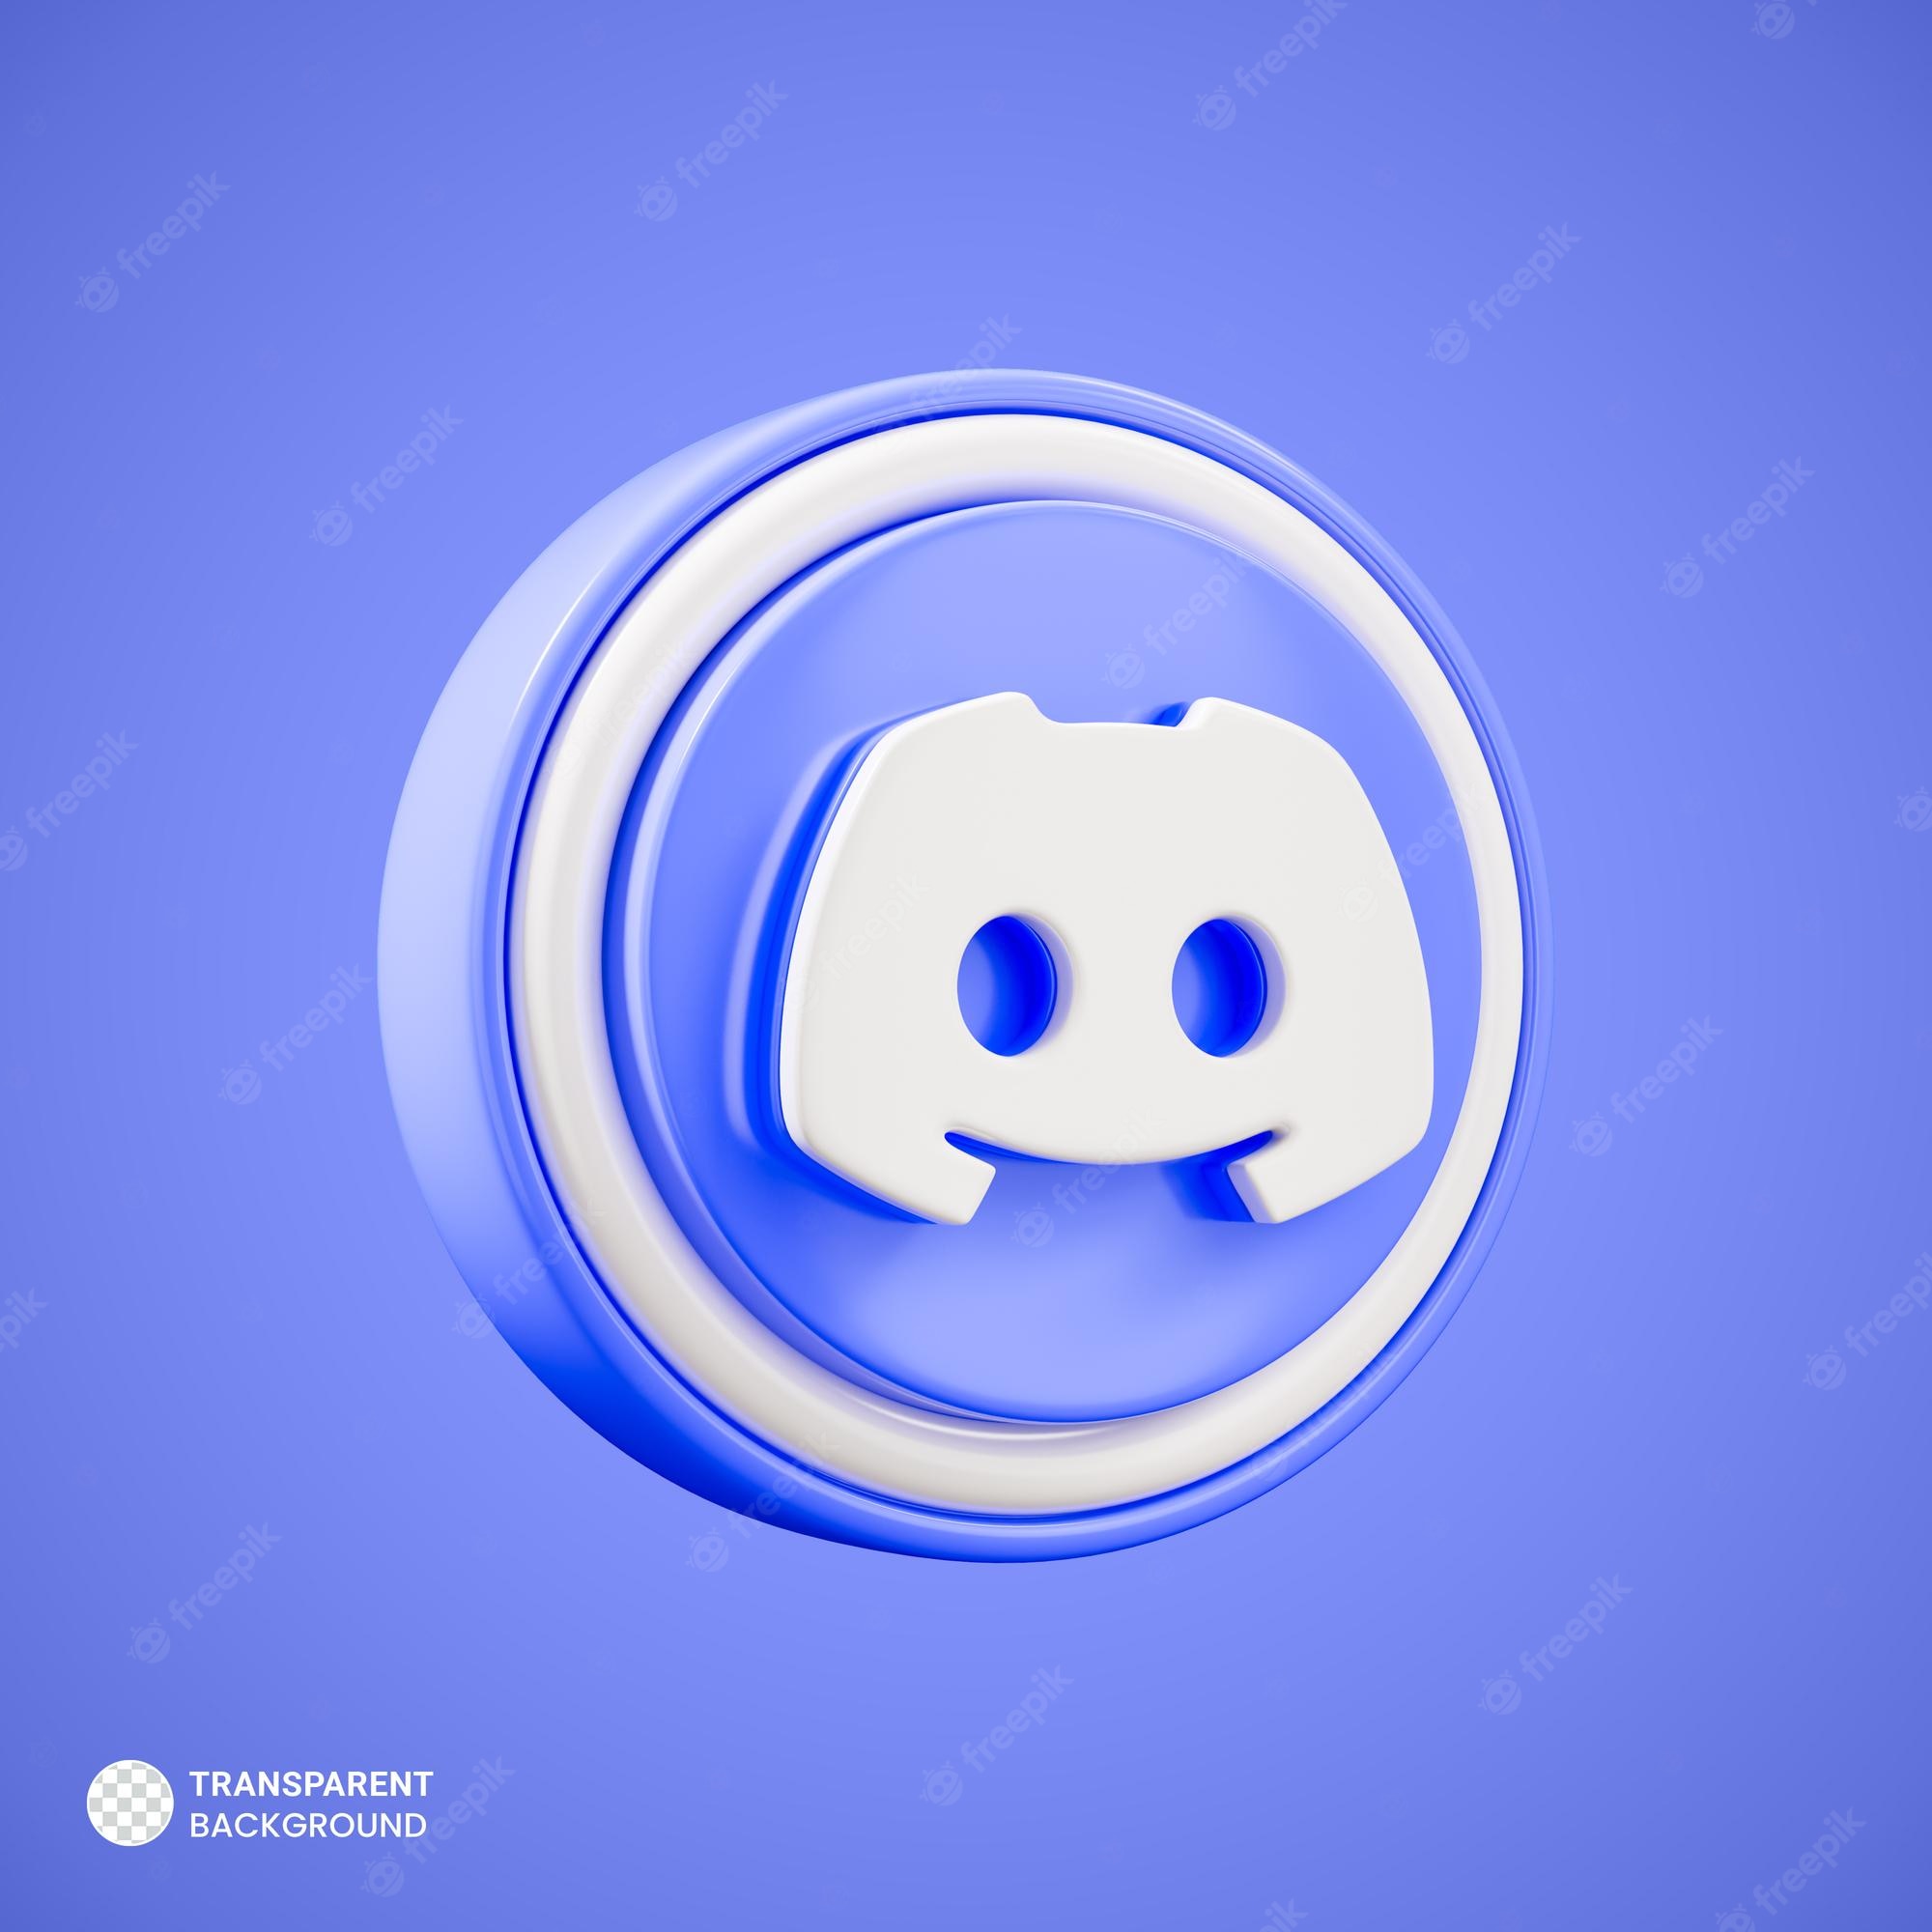 Discord Aesthetic Logo Wallpapers